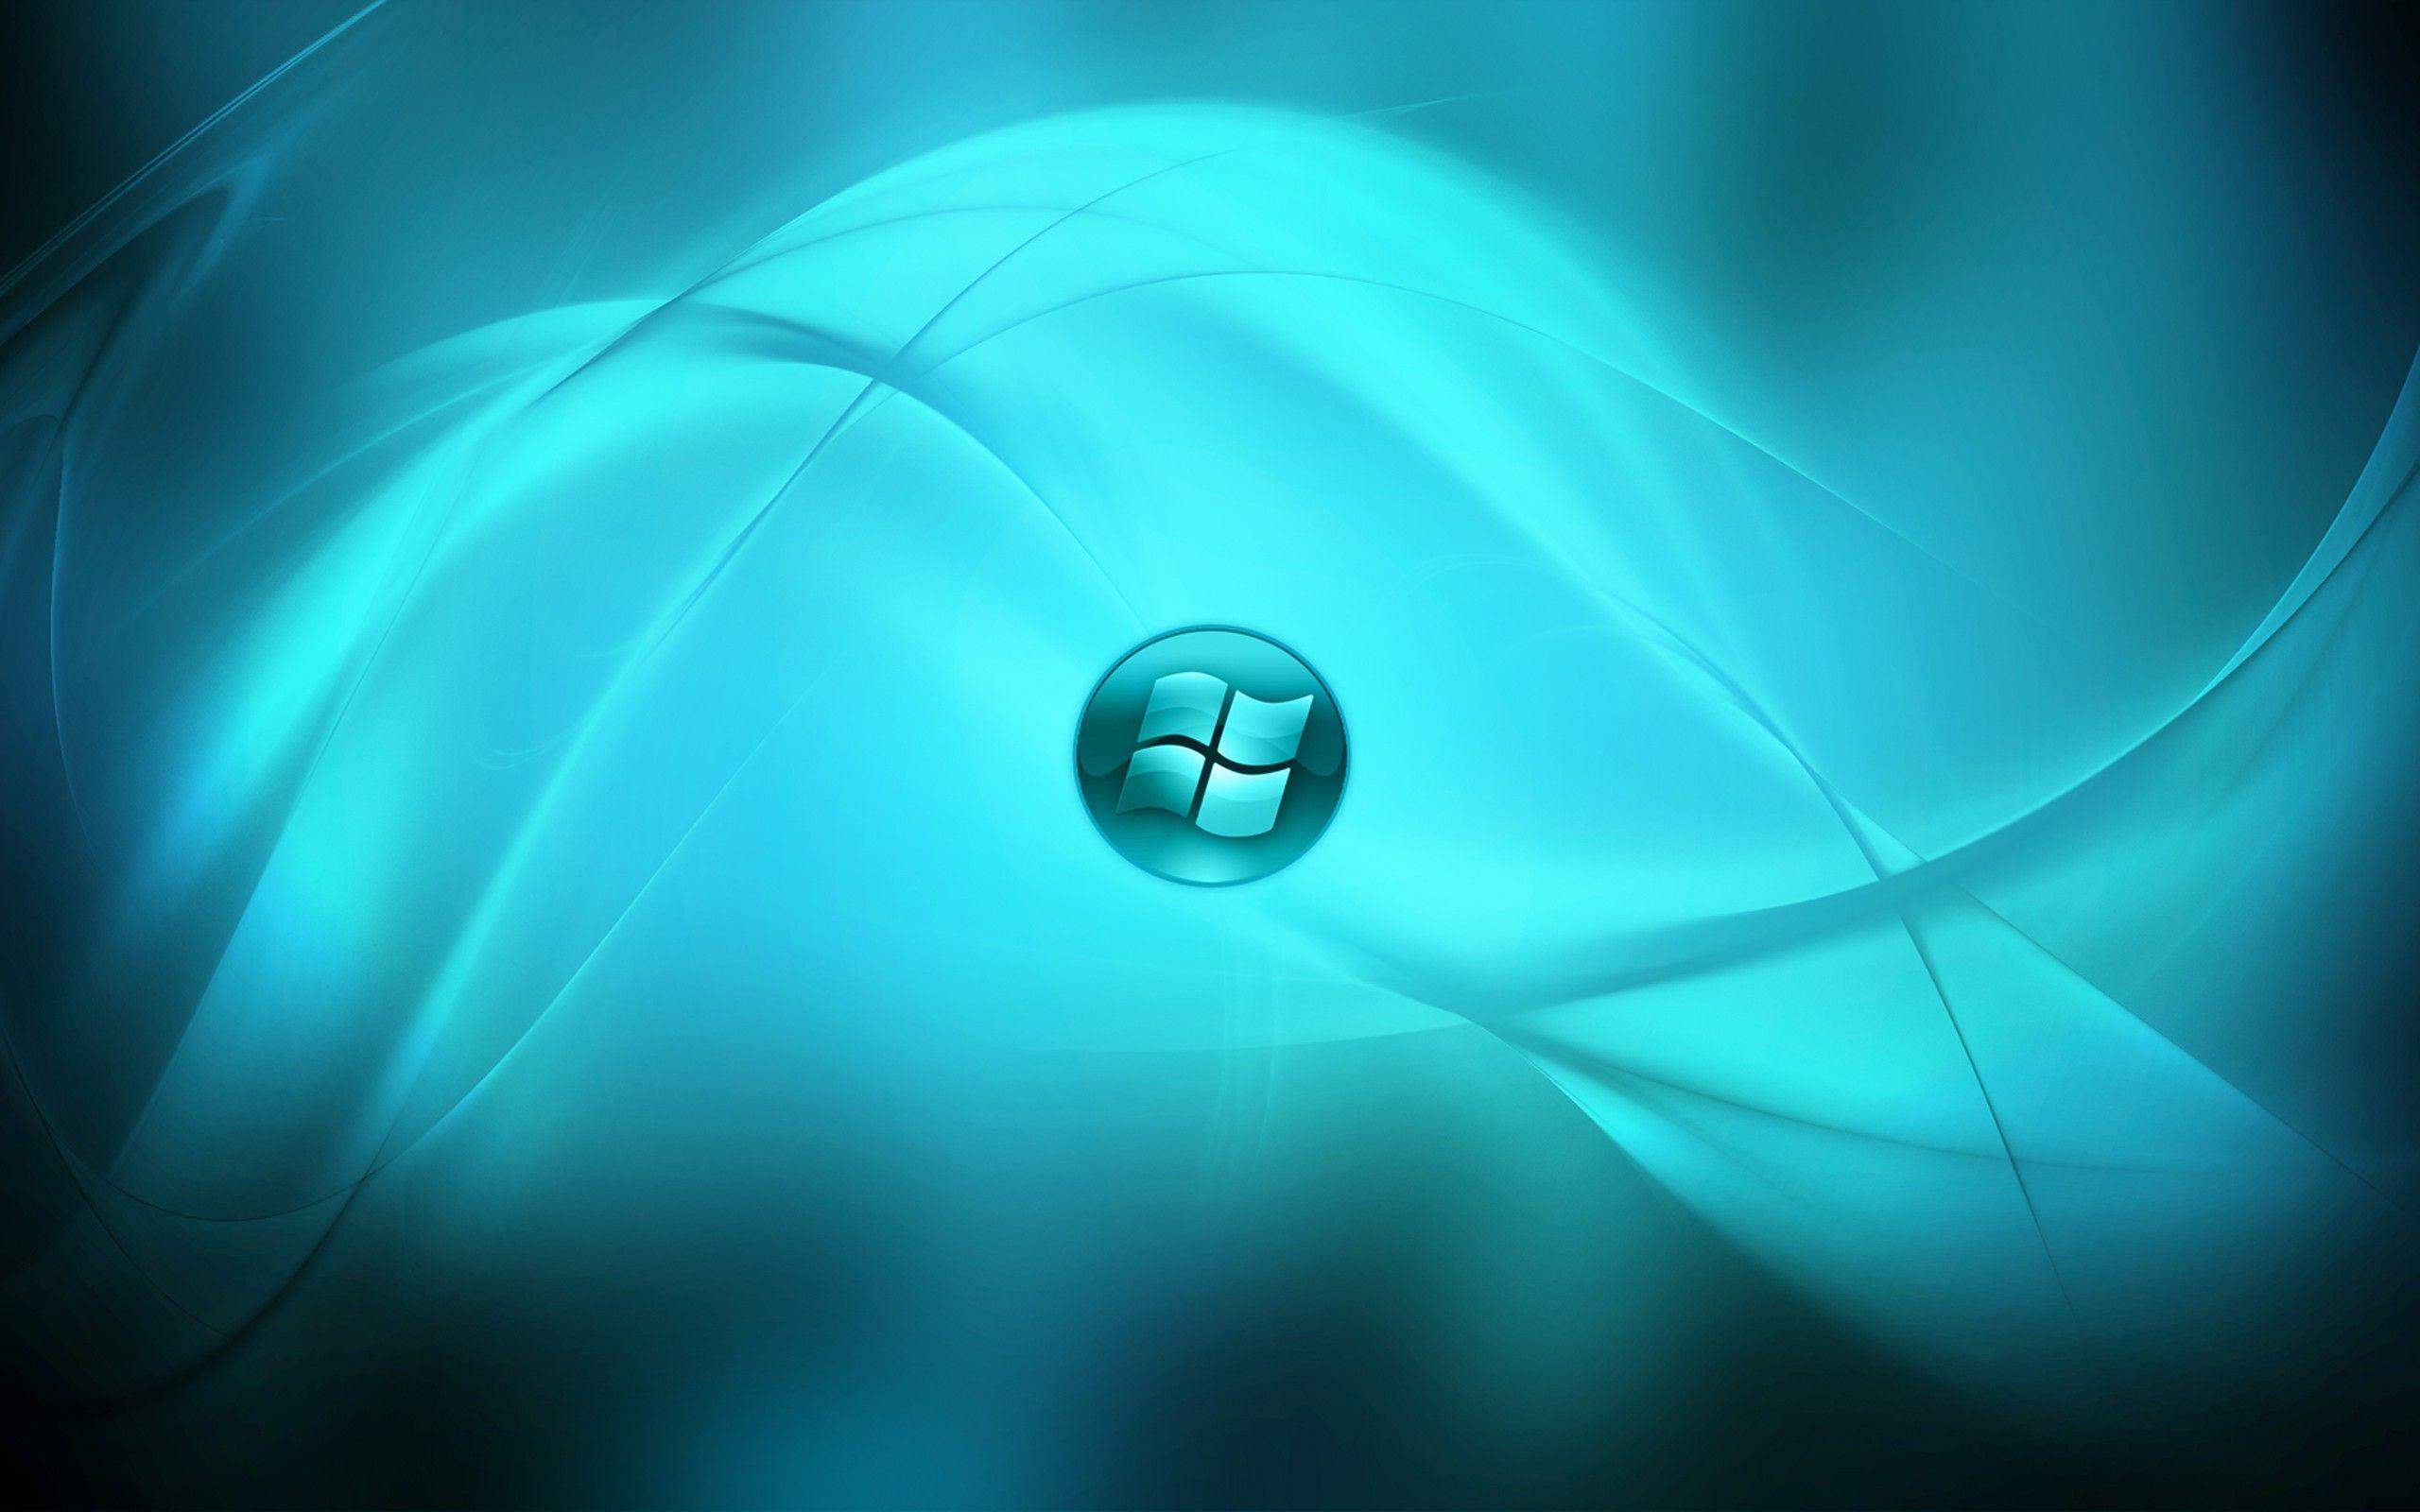 Windows XP HD Wallpapers - Wallpaper Cave Full Hd Wallpapers For Windows 8 1920x1080